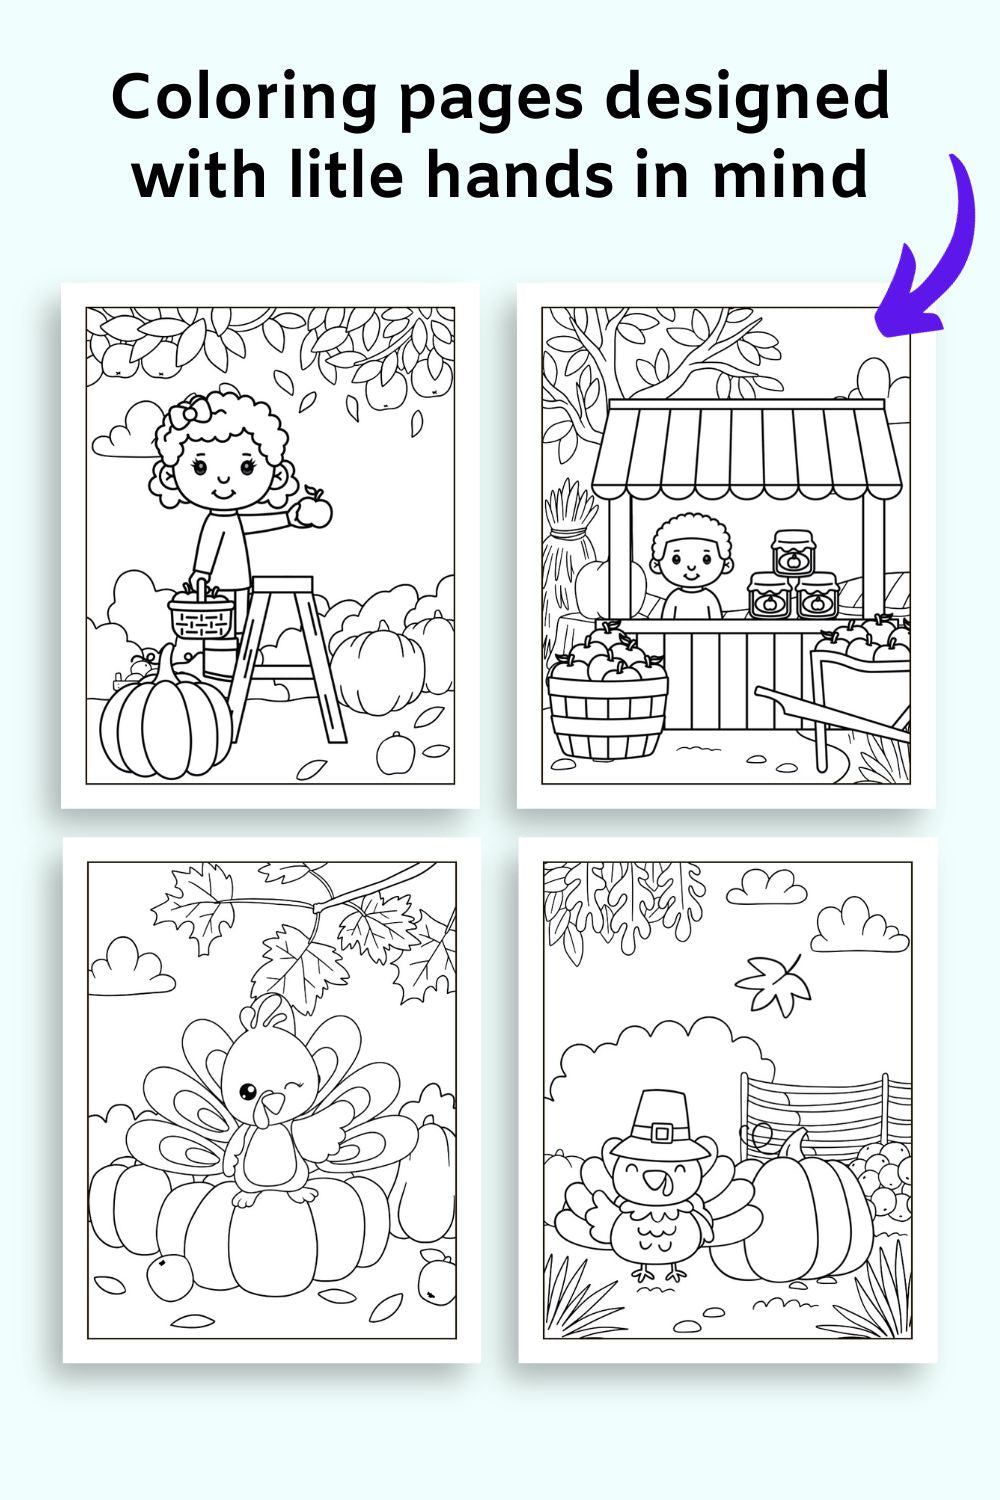 text "coloring pages designed with little hands in mind"